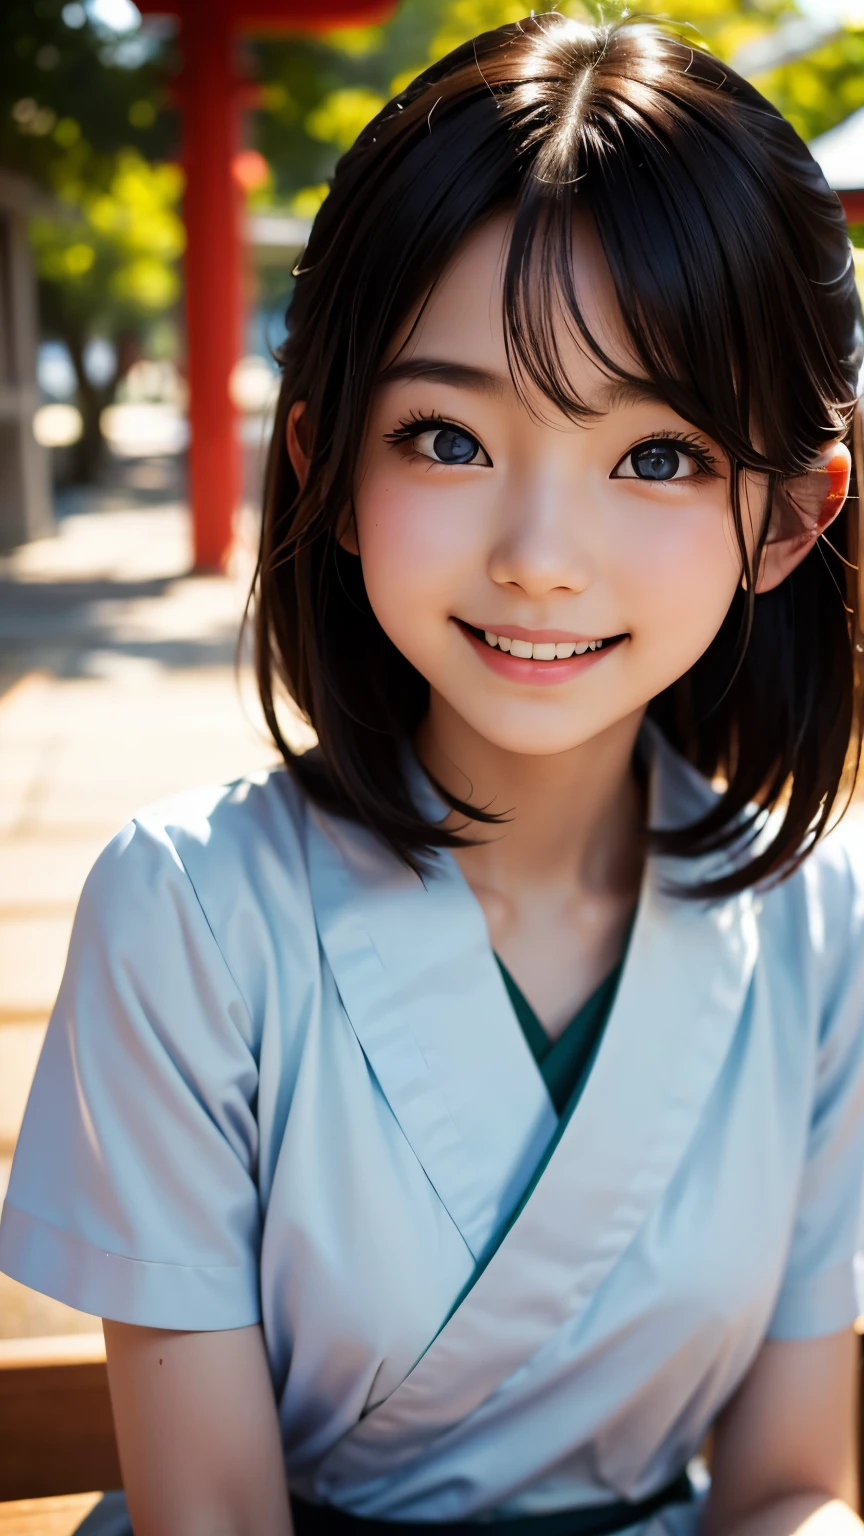 lens: 135mm f1.8, (highest quality),(RAW Photos), (Tabletop:1.1), (Beautiful and neat Japanese girl), Cute face, (Deeply chiseled face:0.7), (freckles:0.4), dappled sunlight, Dramatic lighting, (Japanese School Uniform), (On campus), shy, (Close-up shot:1.2), (smile),, (Sparkling eyes)、(sunlight)